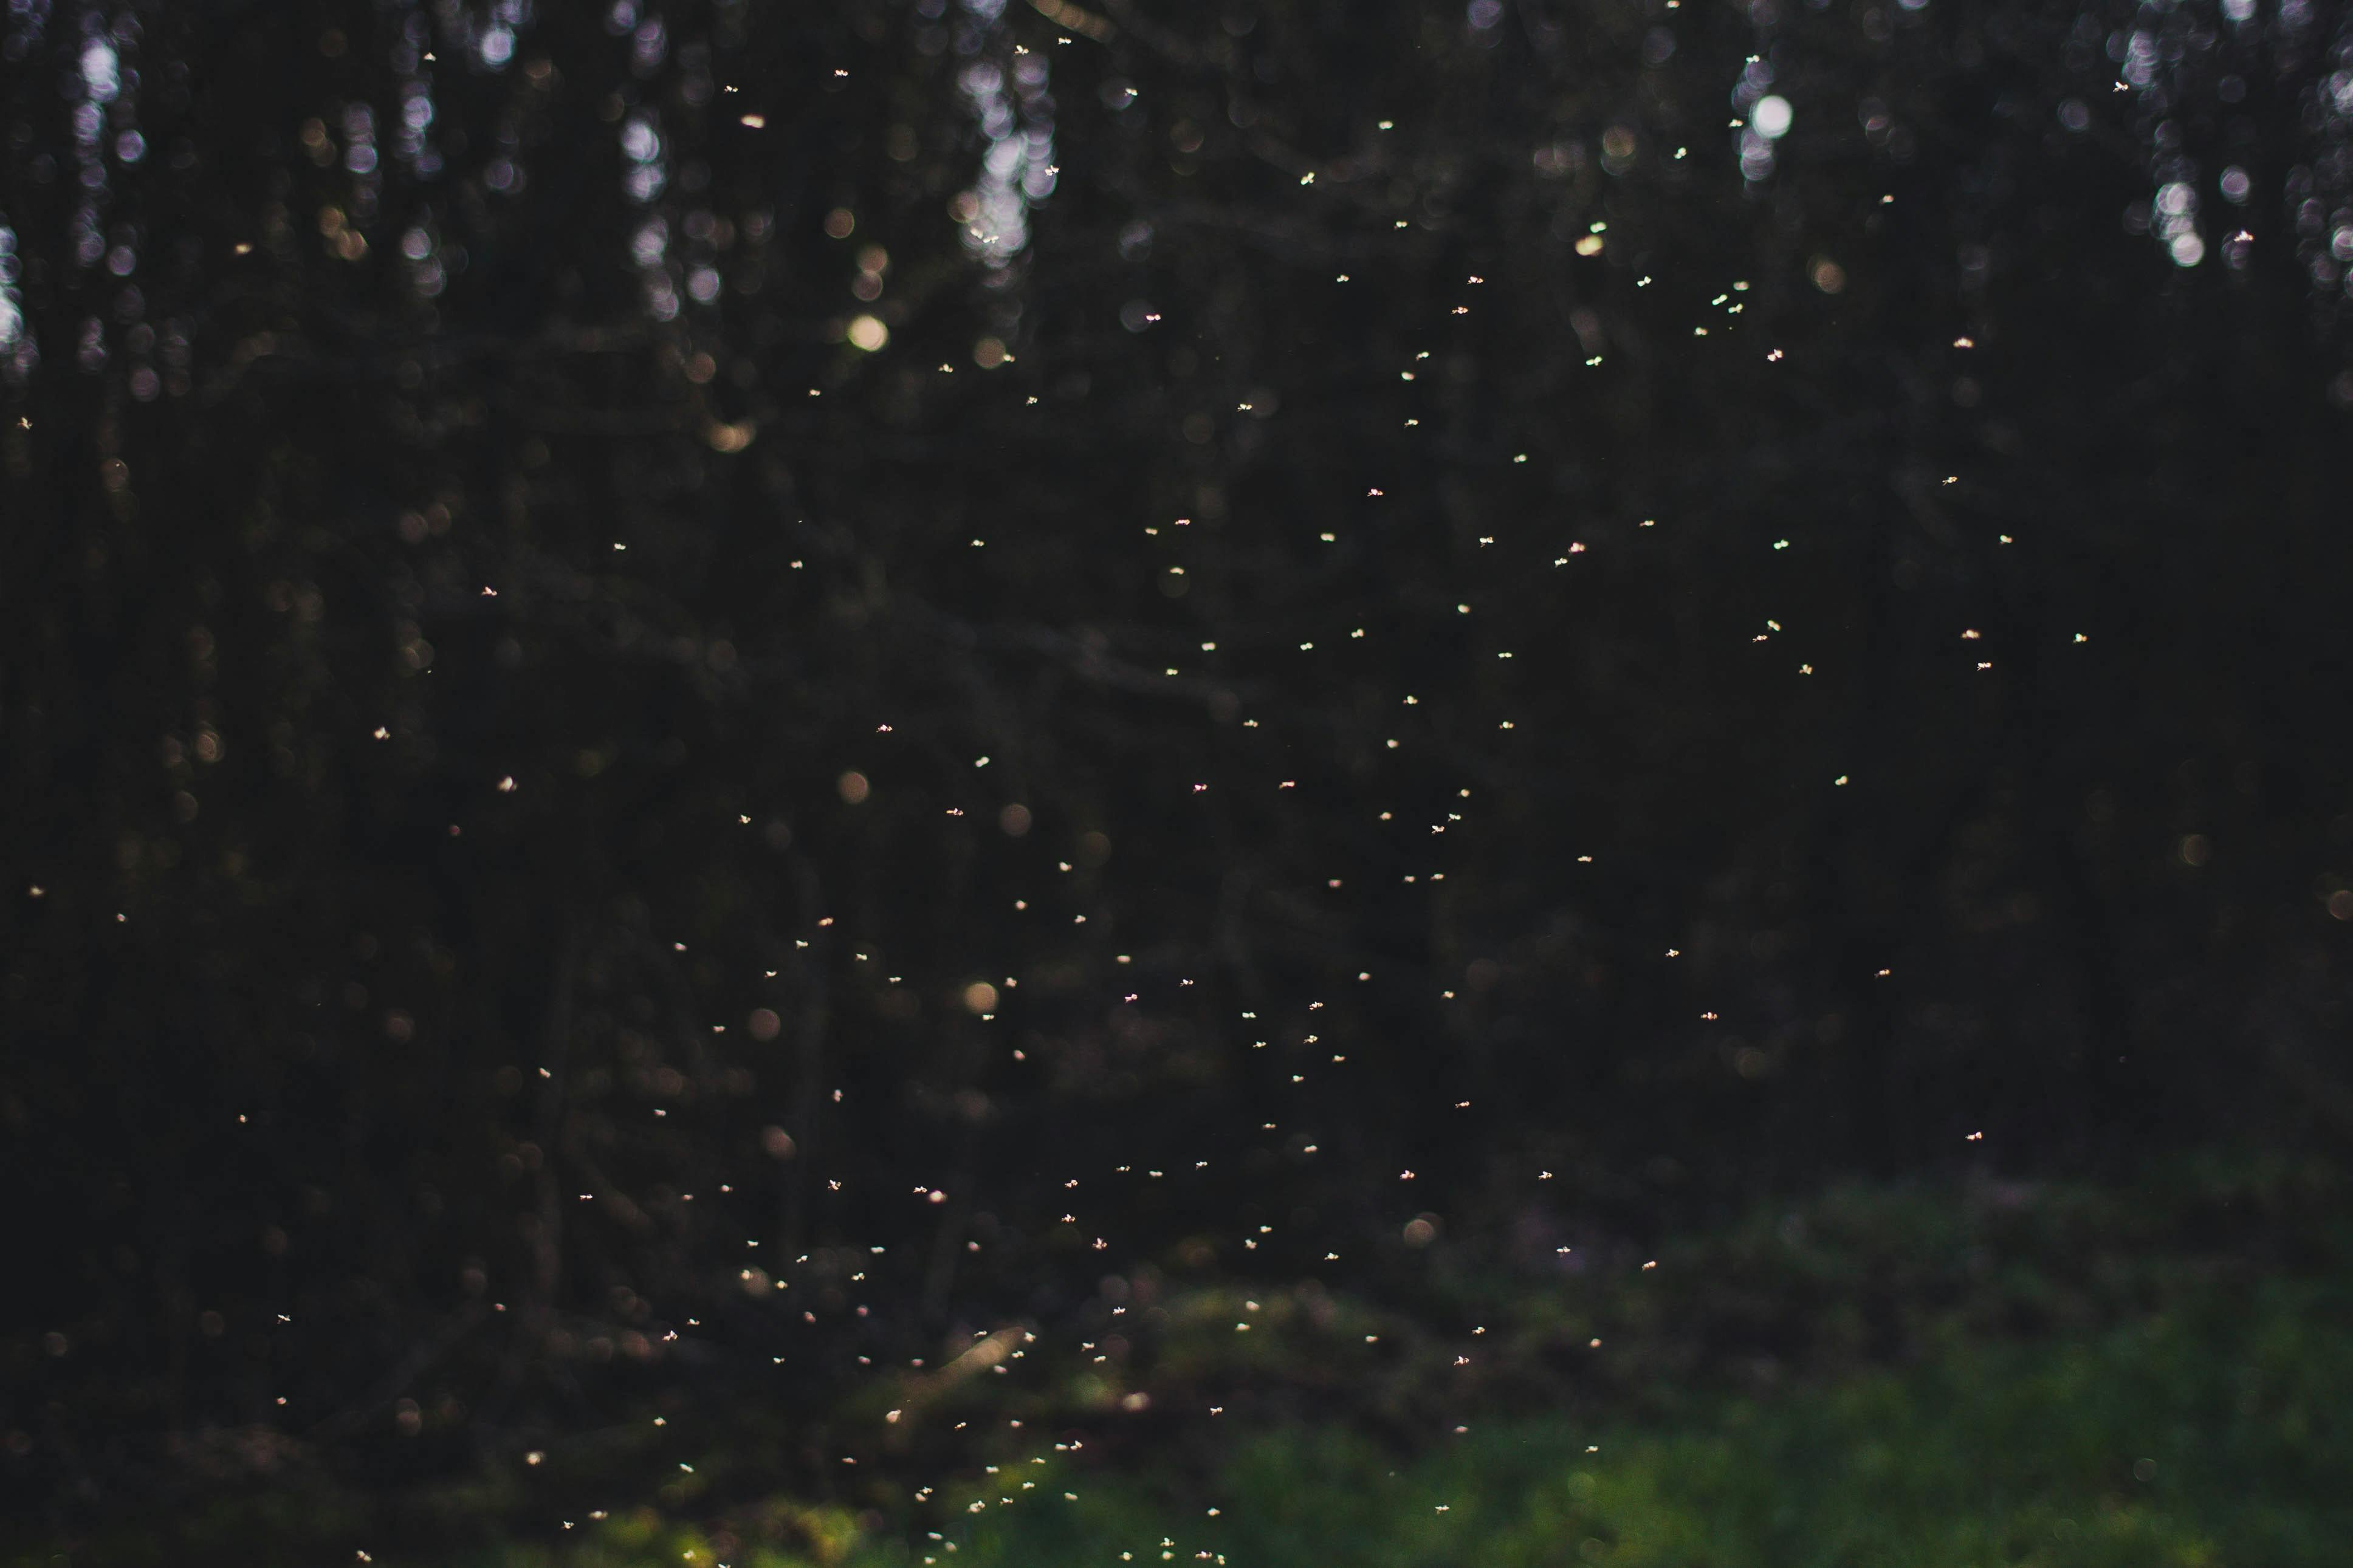 An illuminated cloud of small insects flies in front of a dark, forested background. 